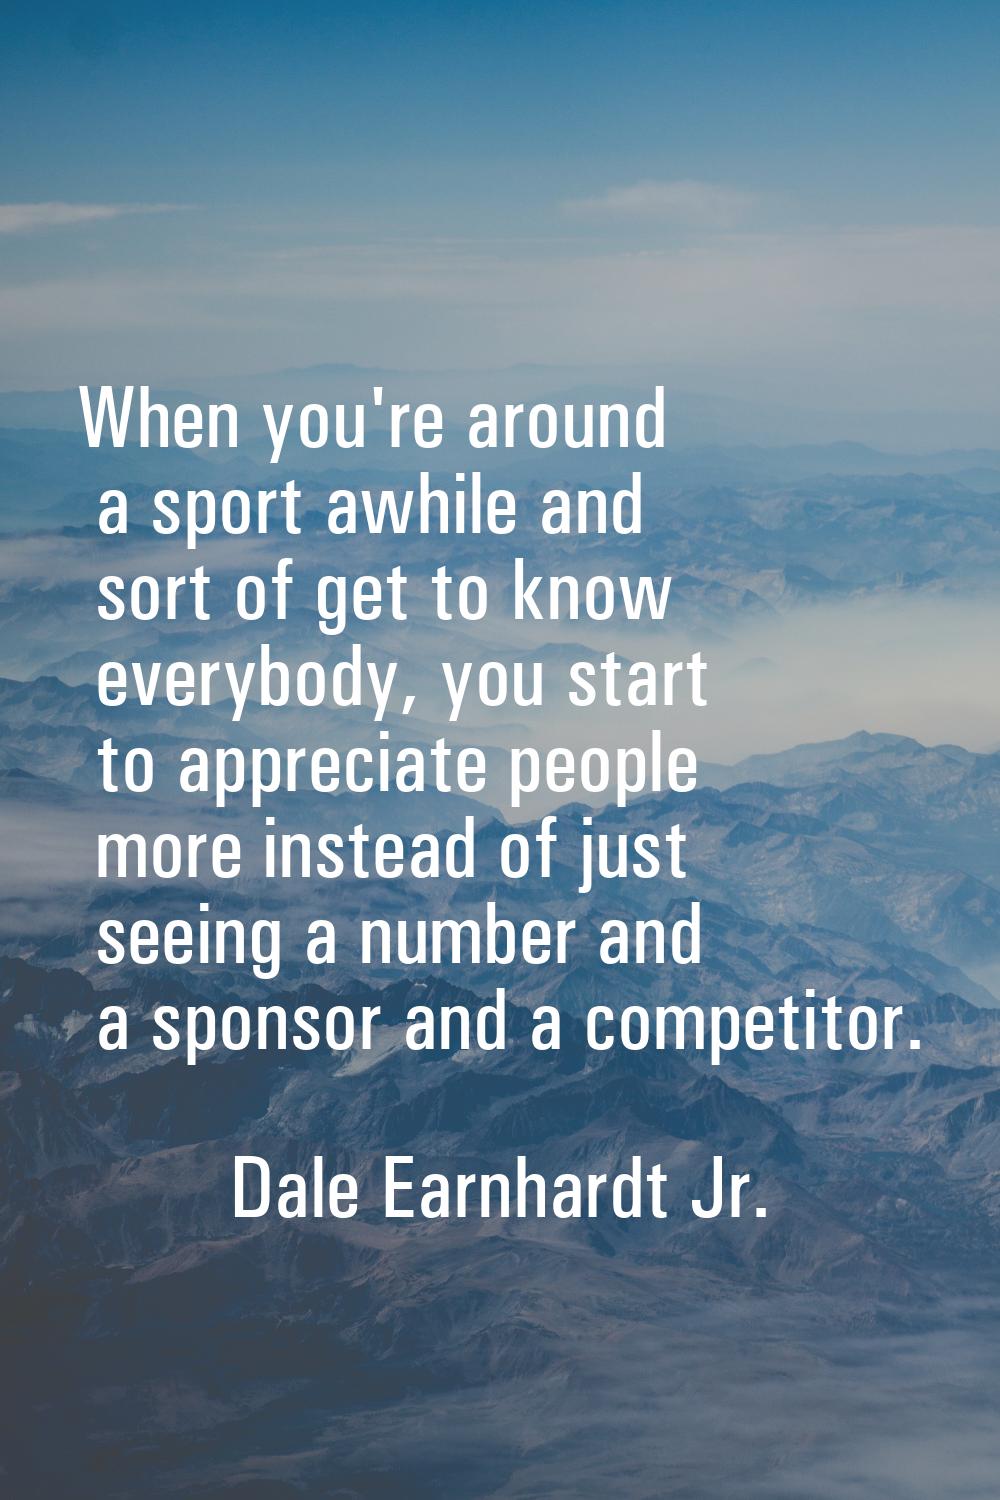 When you're around a sport awhile and sort of get to know everybody, you start to appreciate people